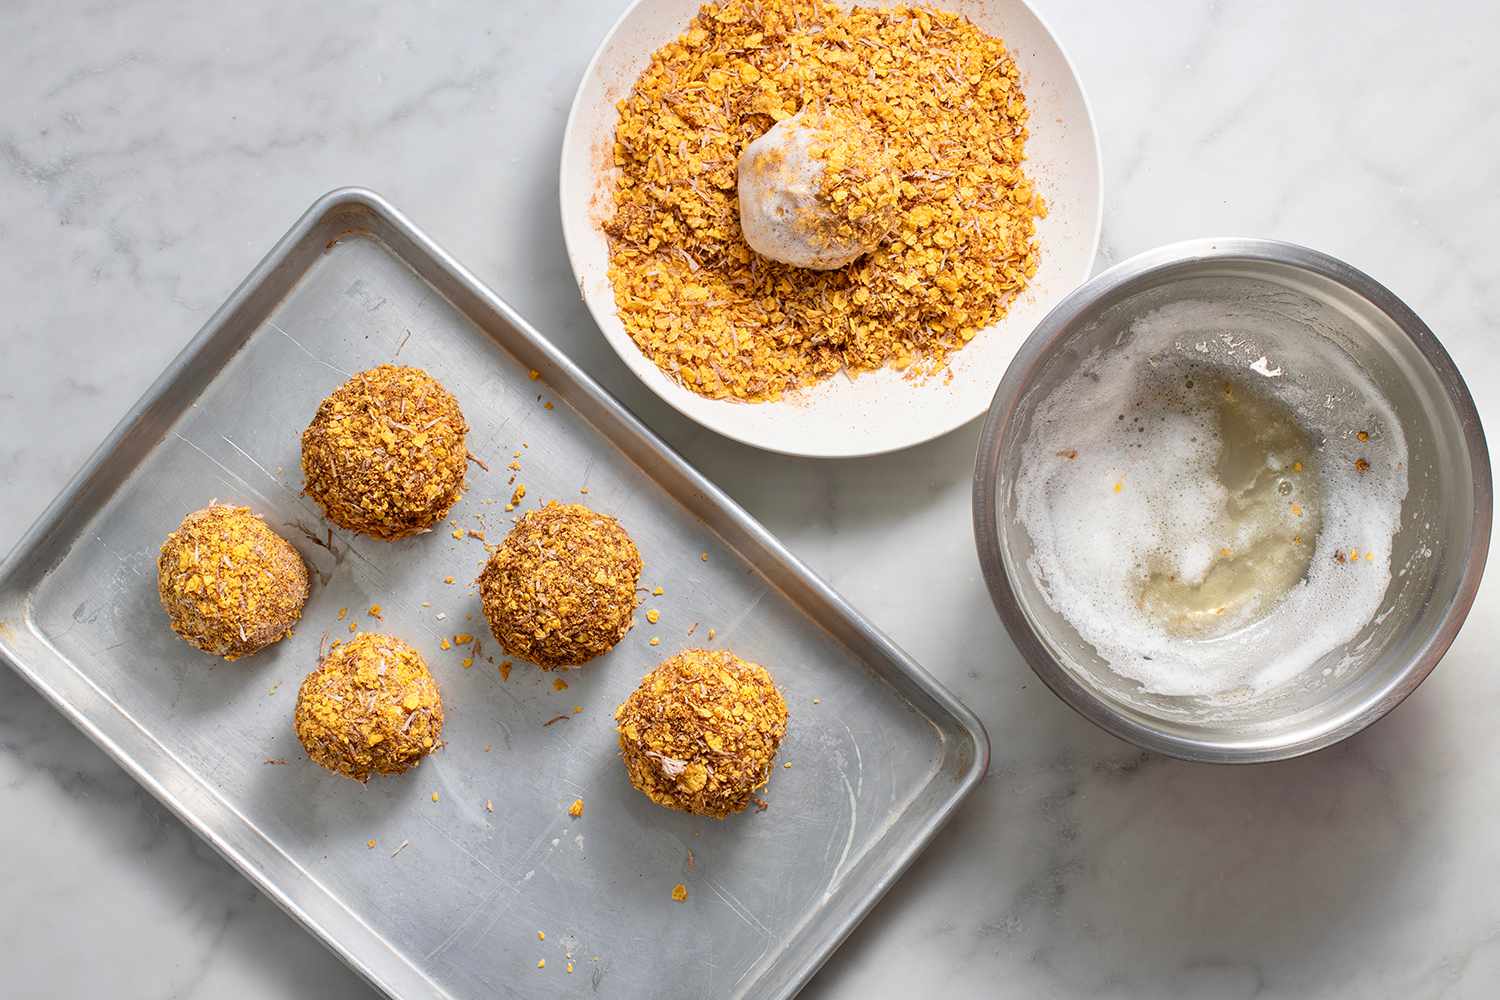 Cornflake-covered ice cream in egg whites and dipped in more cornflake mixture